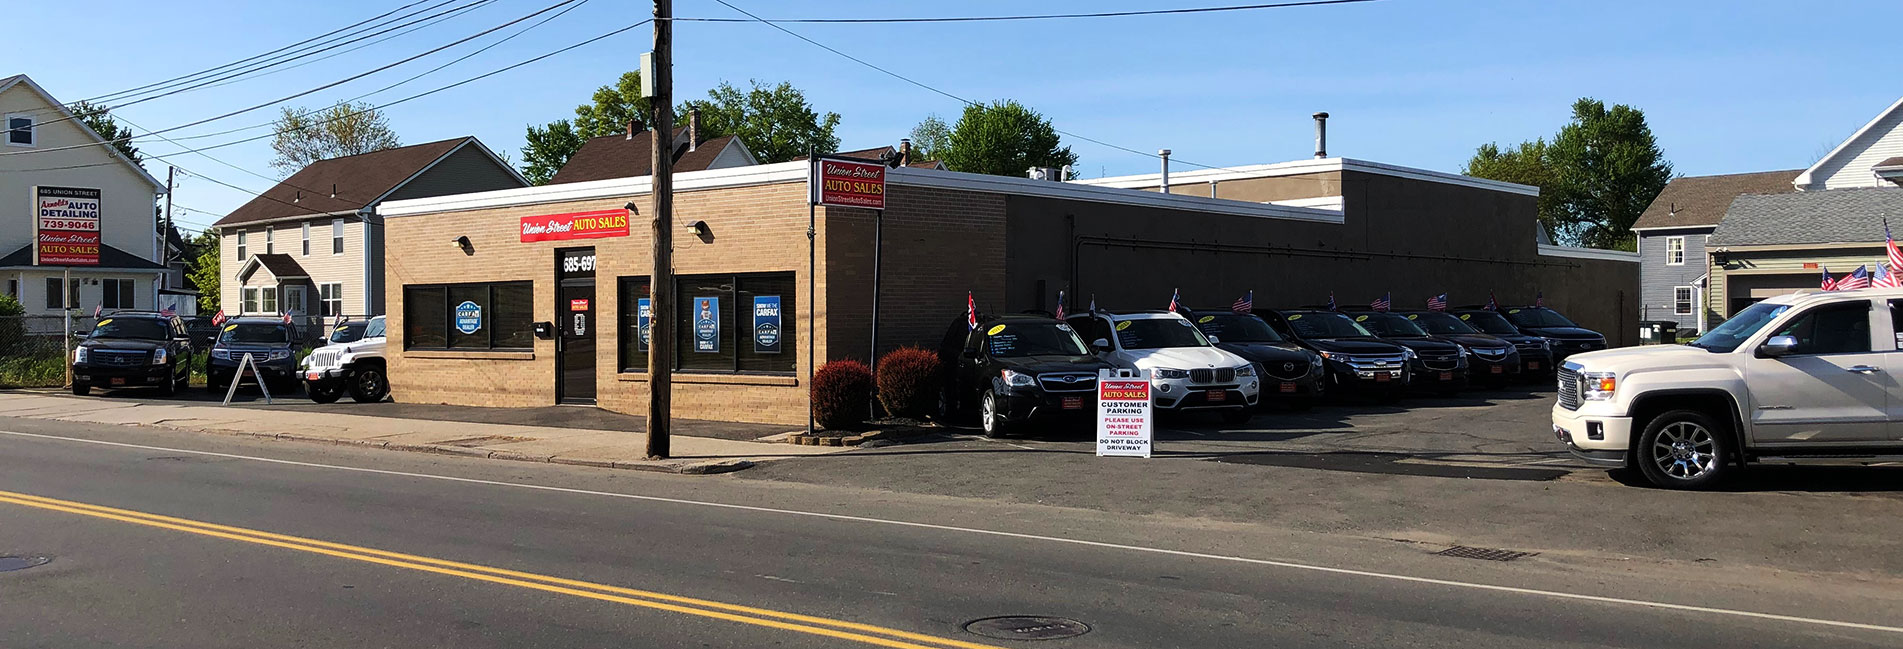 Used cars for sale in West Springfield | Union Street Auto Sales. West Springfield Massachusetts